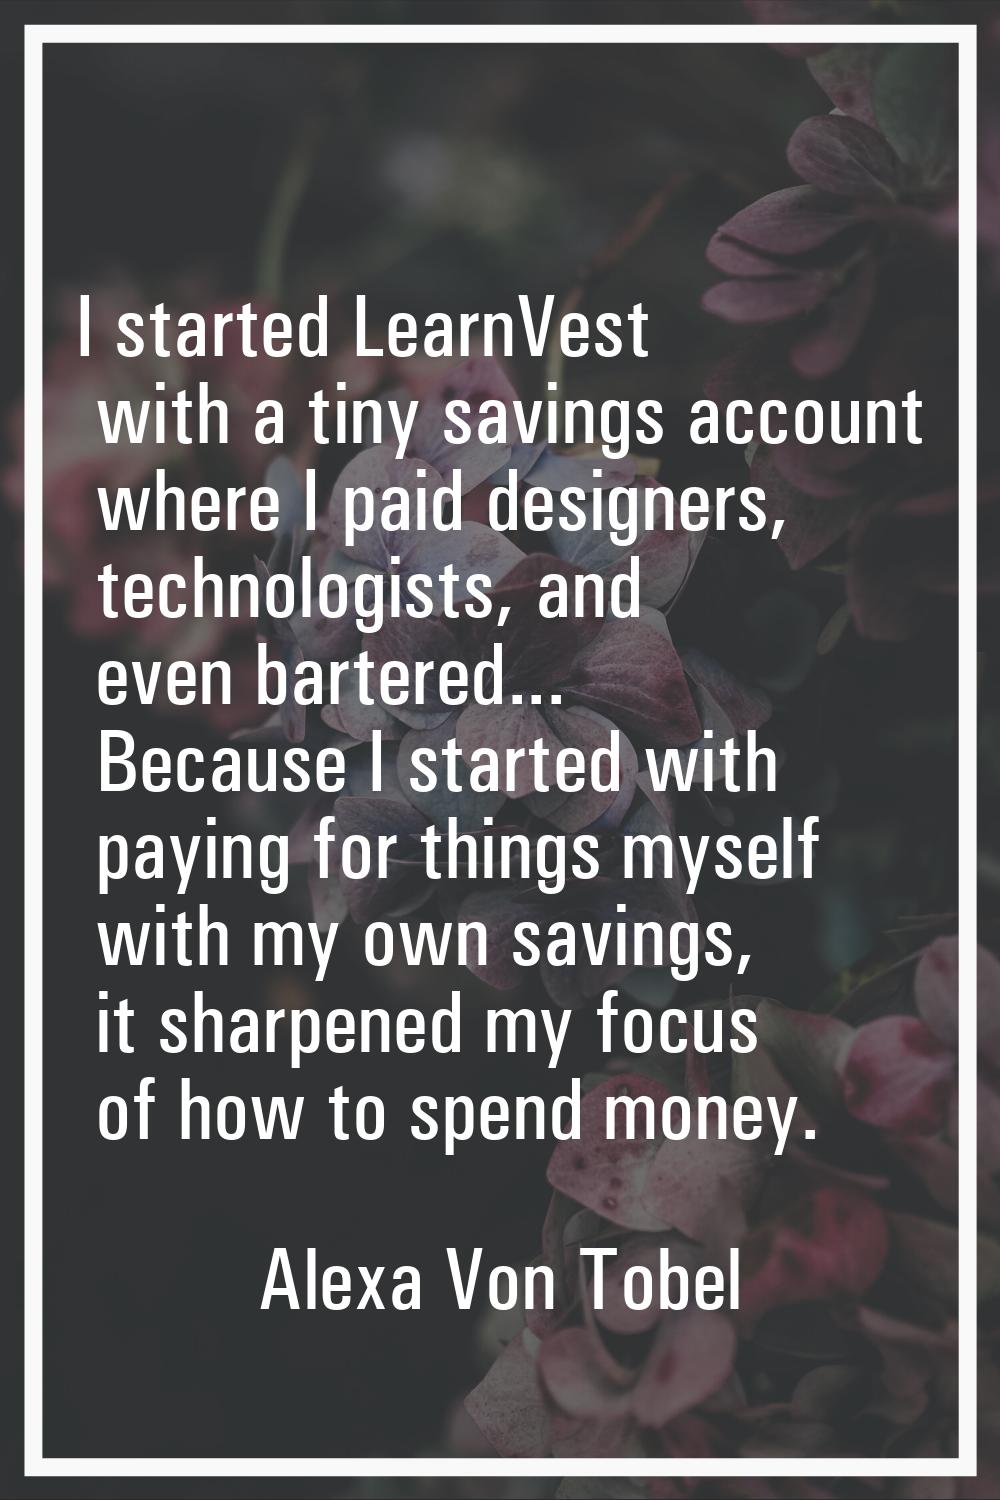 I started LearnVest with a tiny savings account where I paid designers, technologists, and even bar